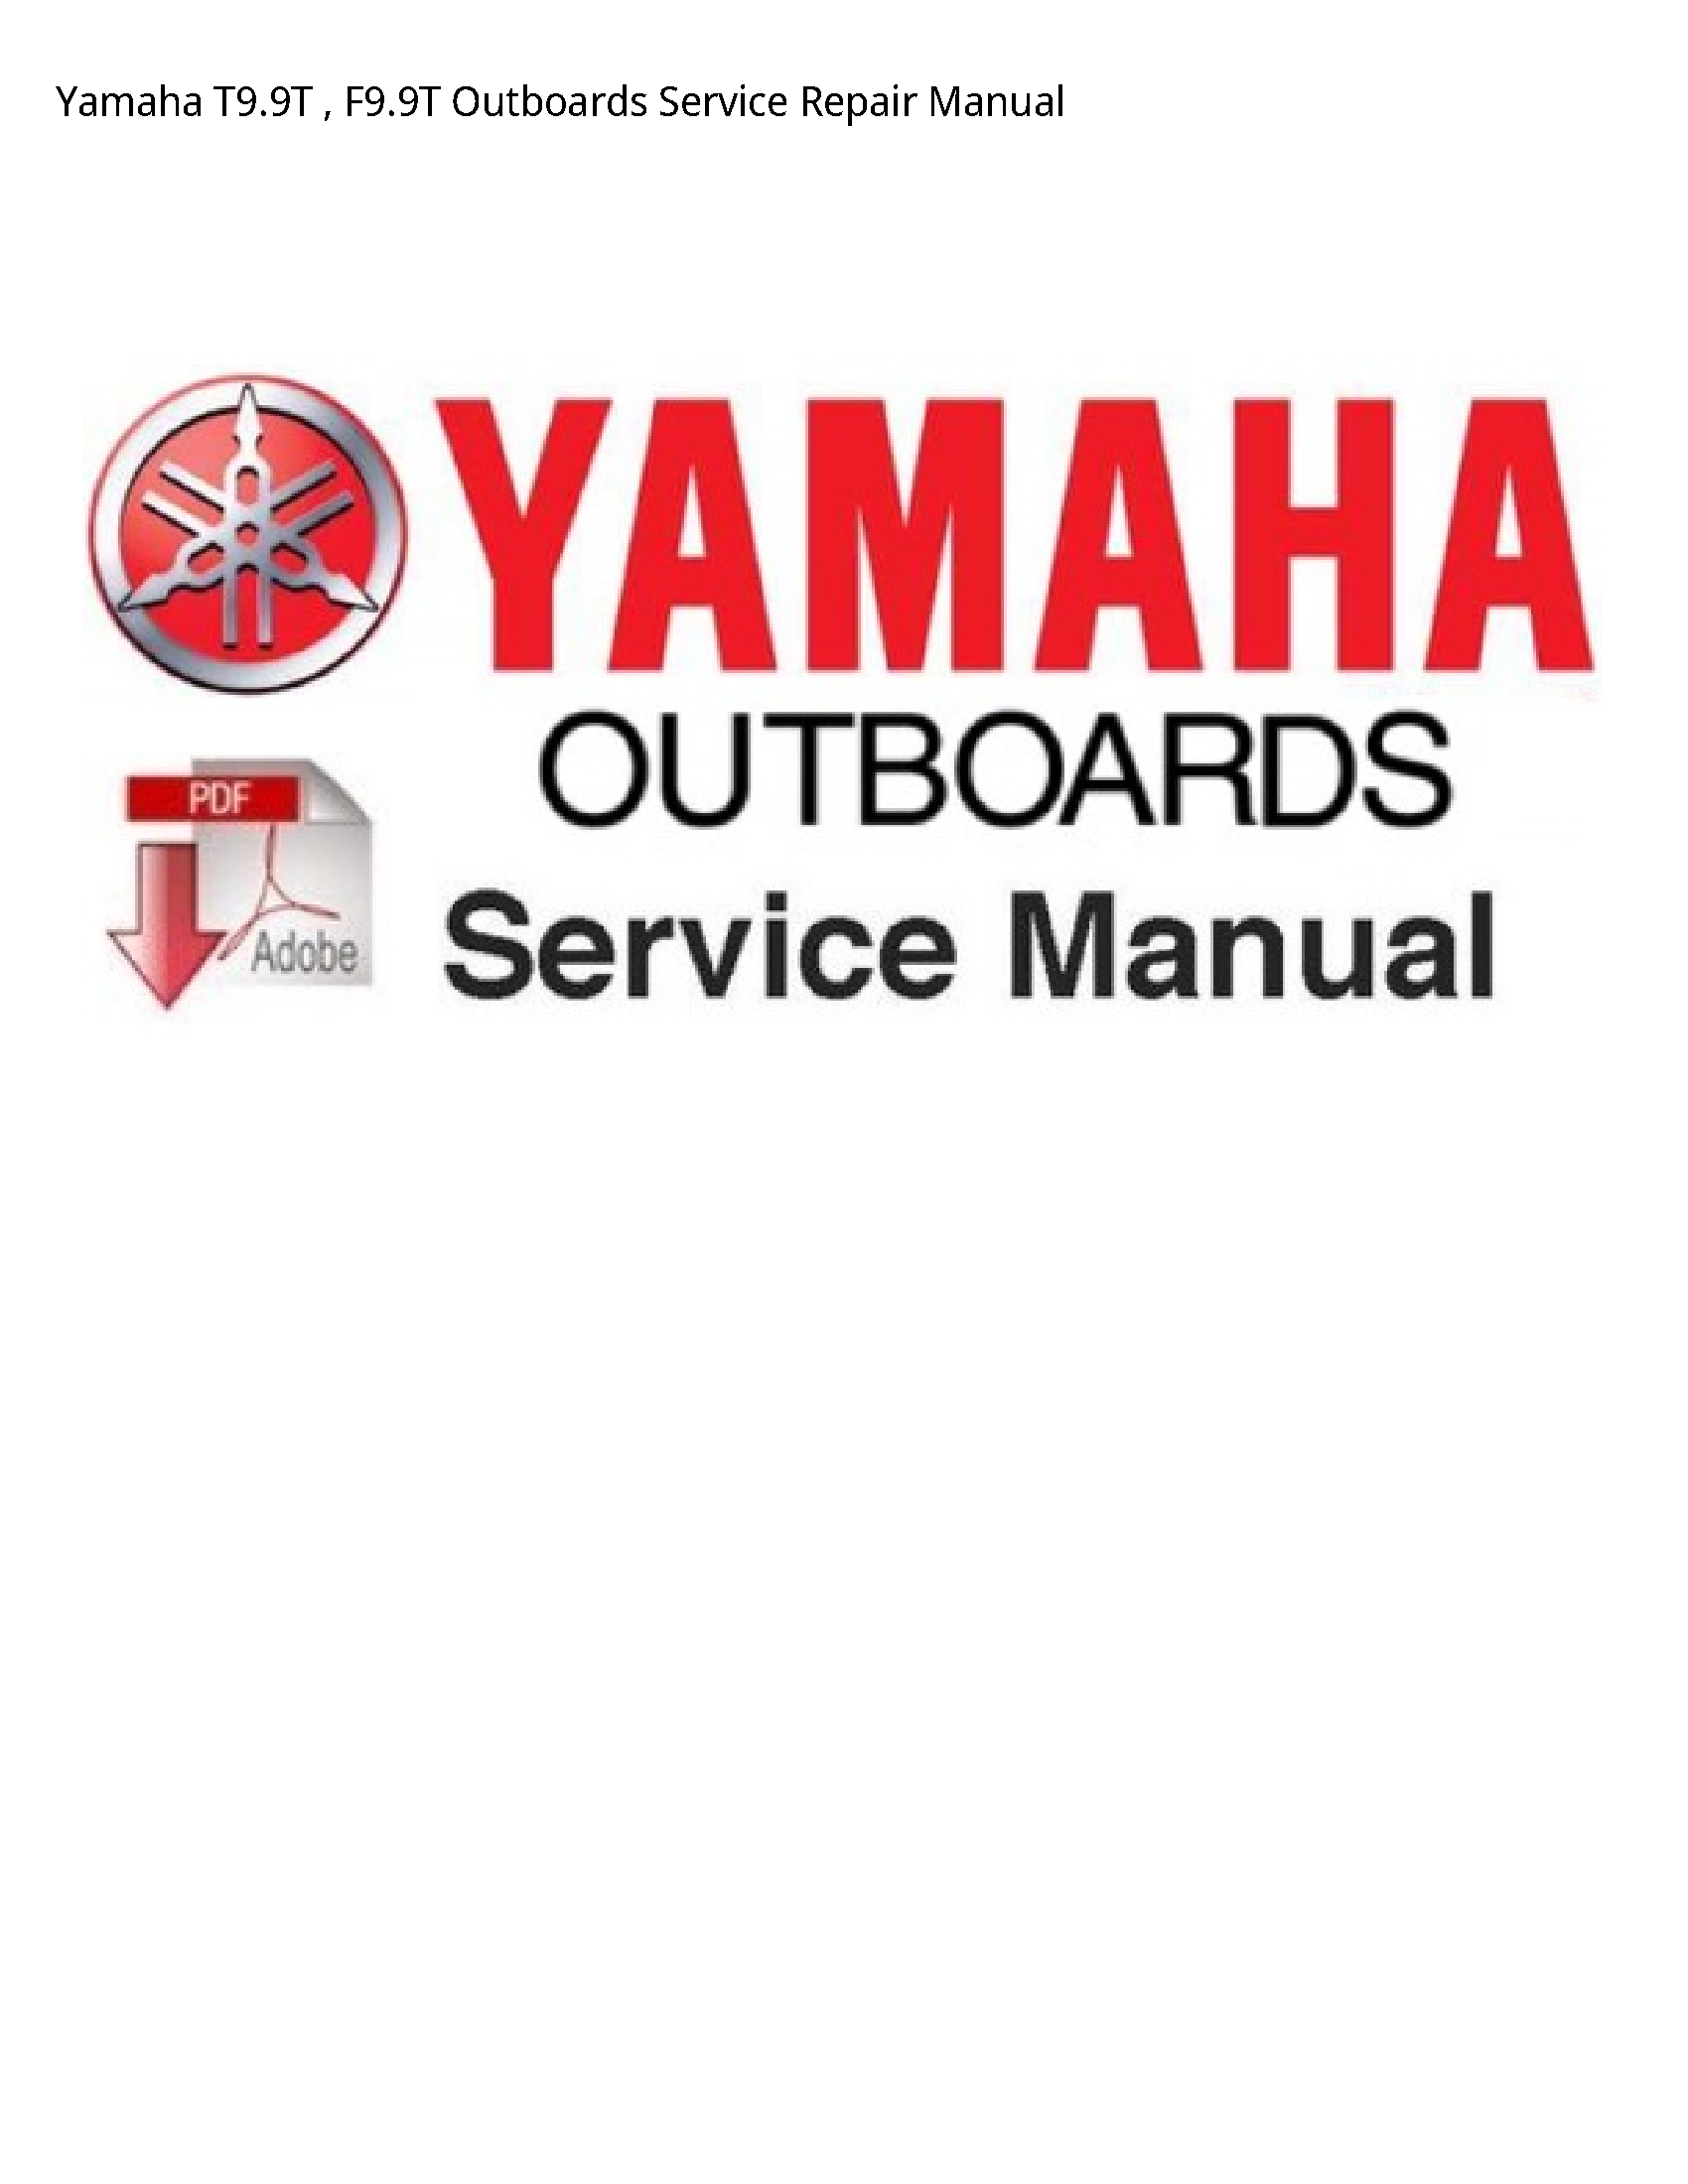 Yamaha T9.9T Outboards manual